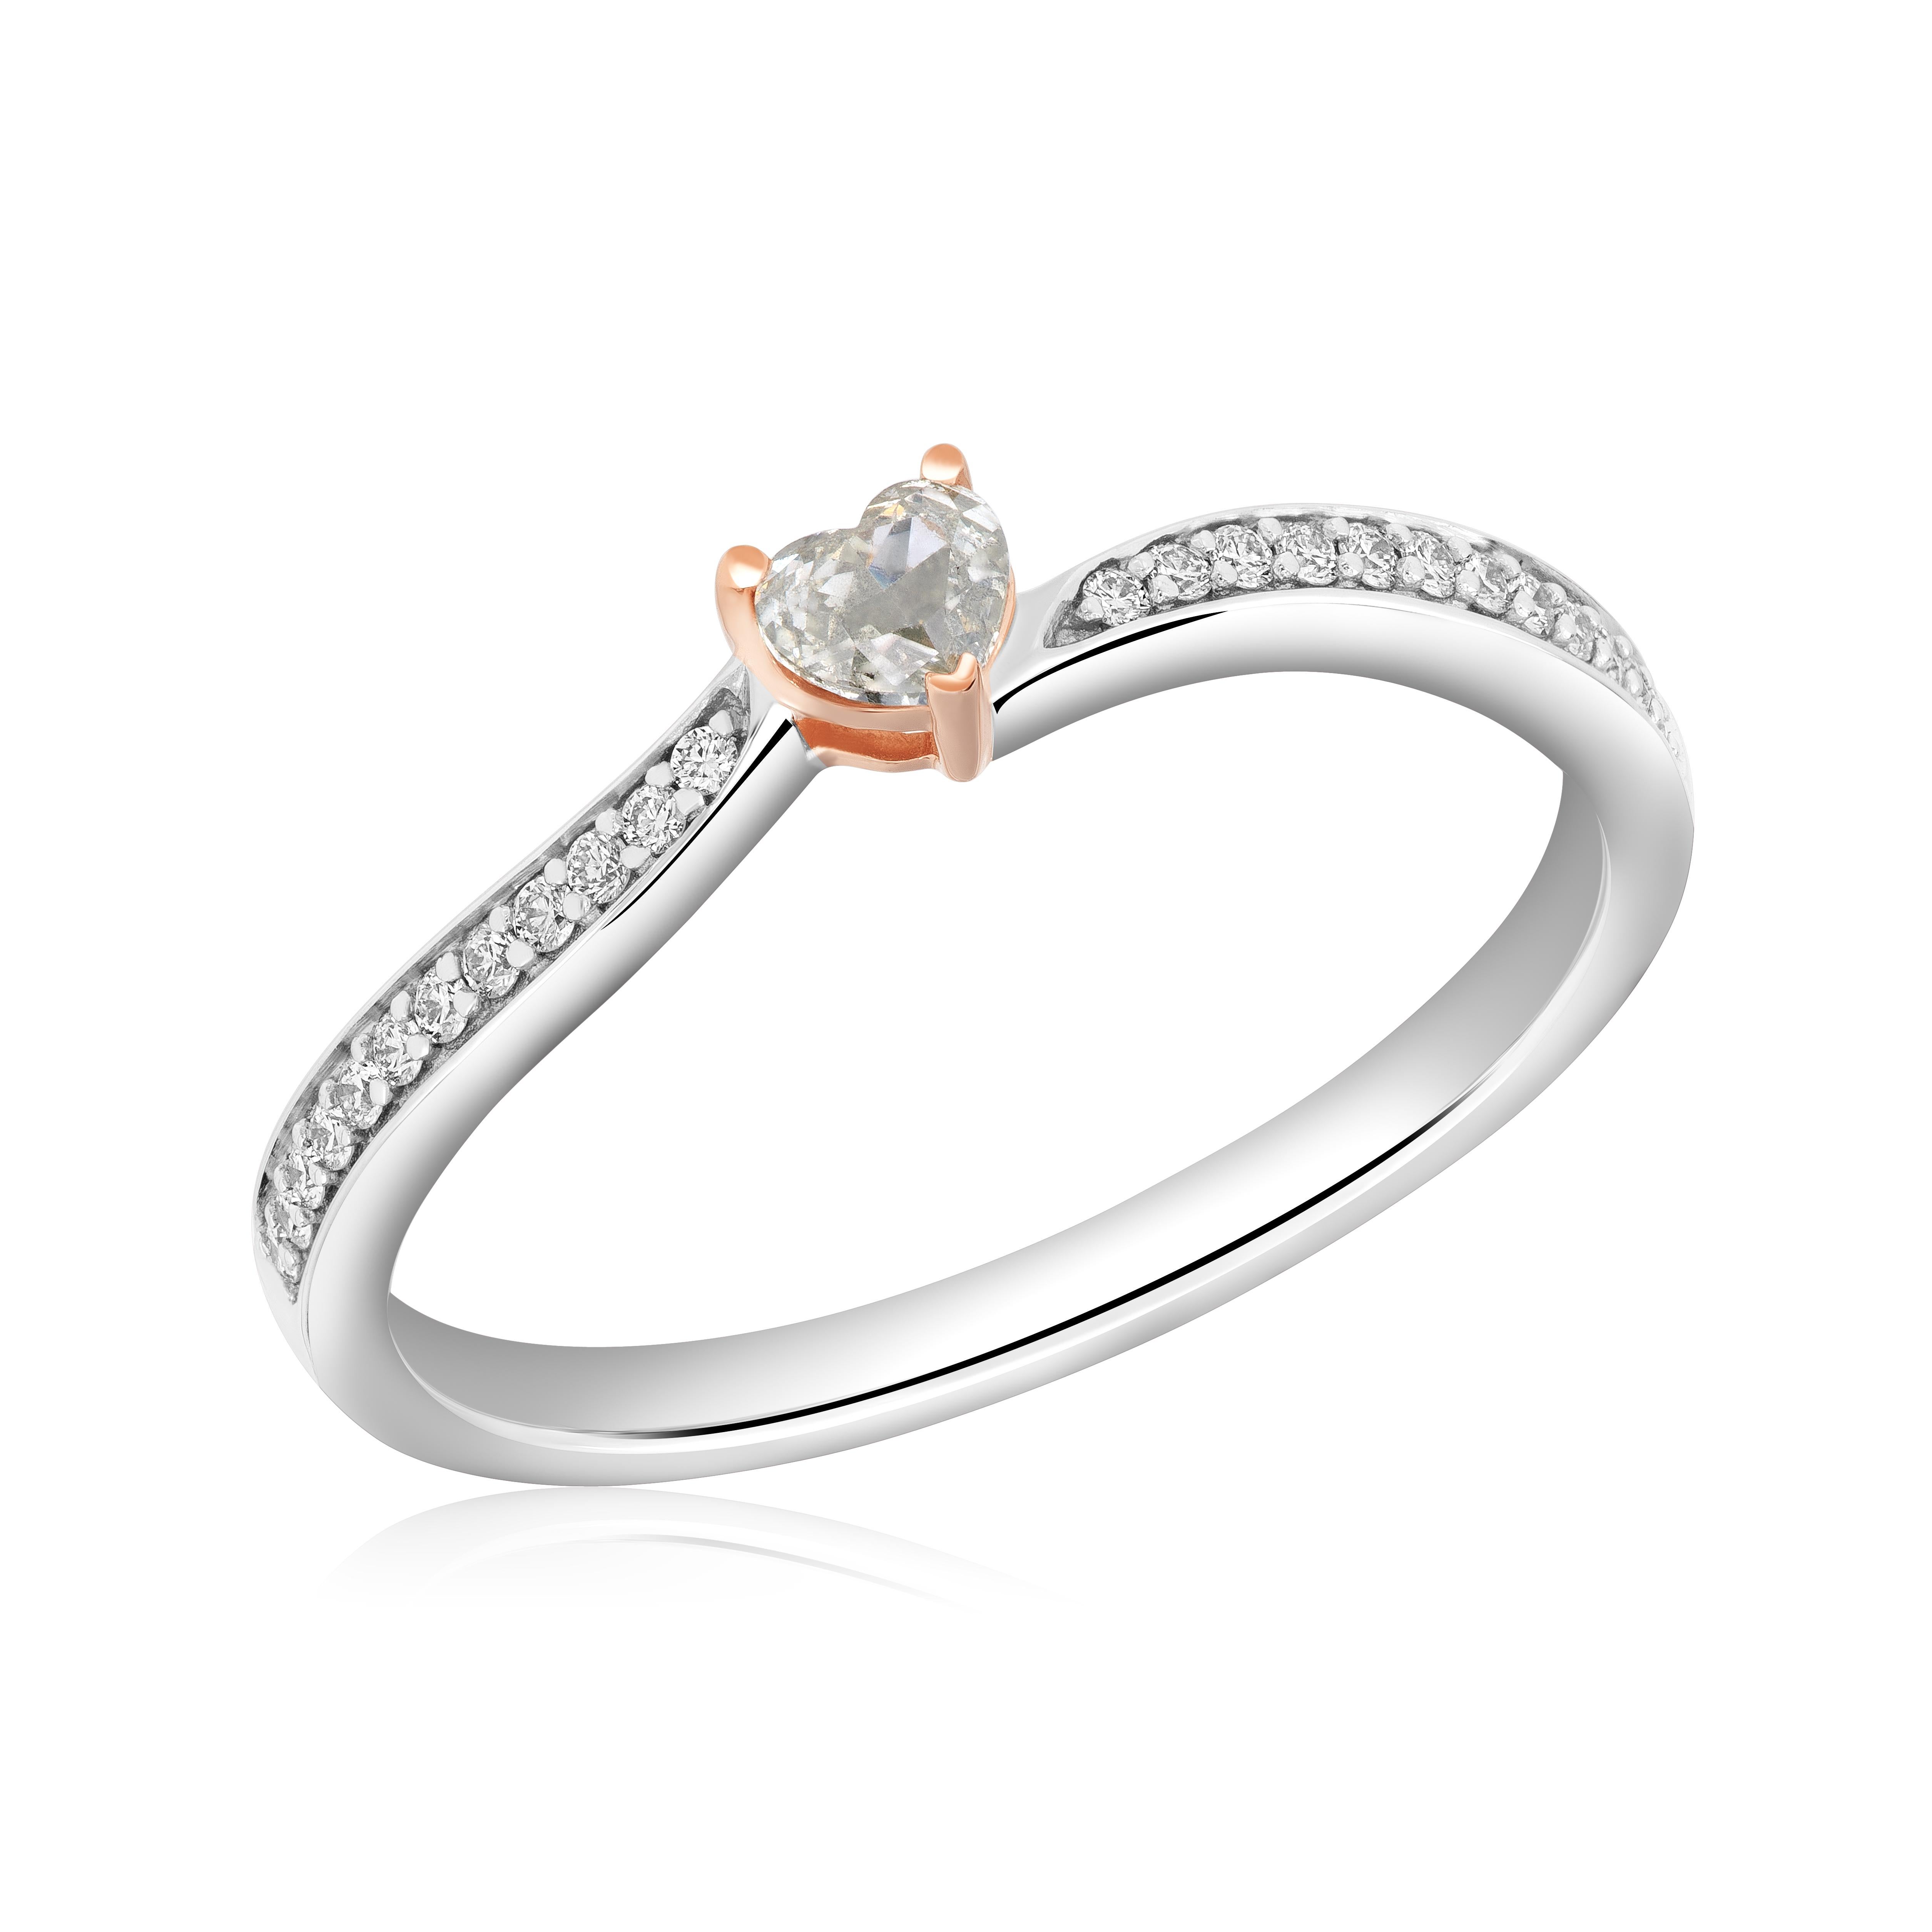 Elevate your style with a captivating statement piece, the stunning heart-shaped stackable ring. Adorned with a rare 0.18-carat fancy light grayish-yellow diamond, it exudes an alluring charm. The ring is further embellished by 24 white melee